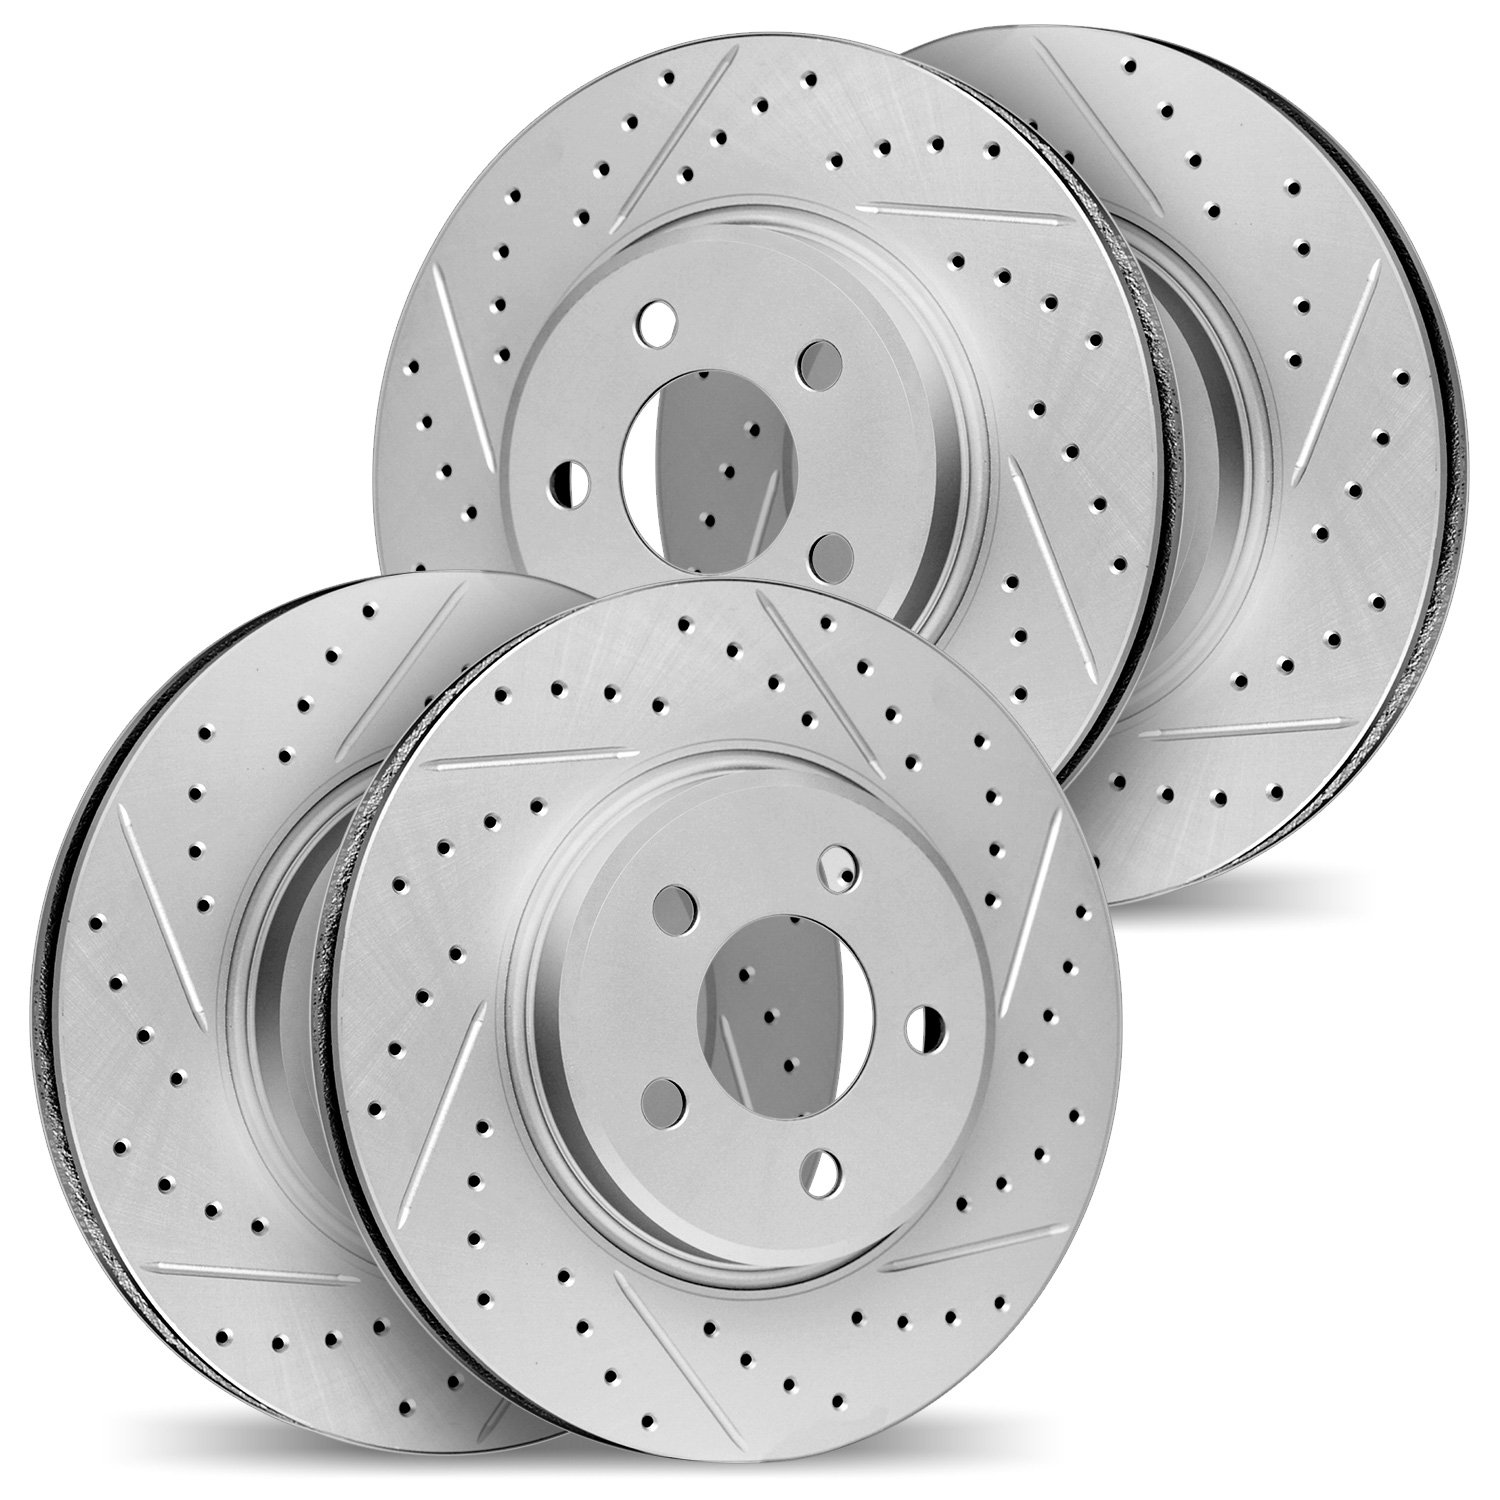 2004-75021 Geoperformance Drilled/Slotted Brake Rotors, 2010-2017 Lexus/Toyota/Scion, Position: Front and Rear